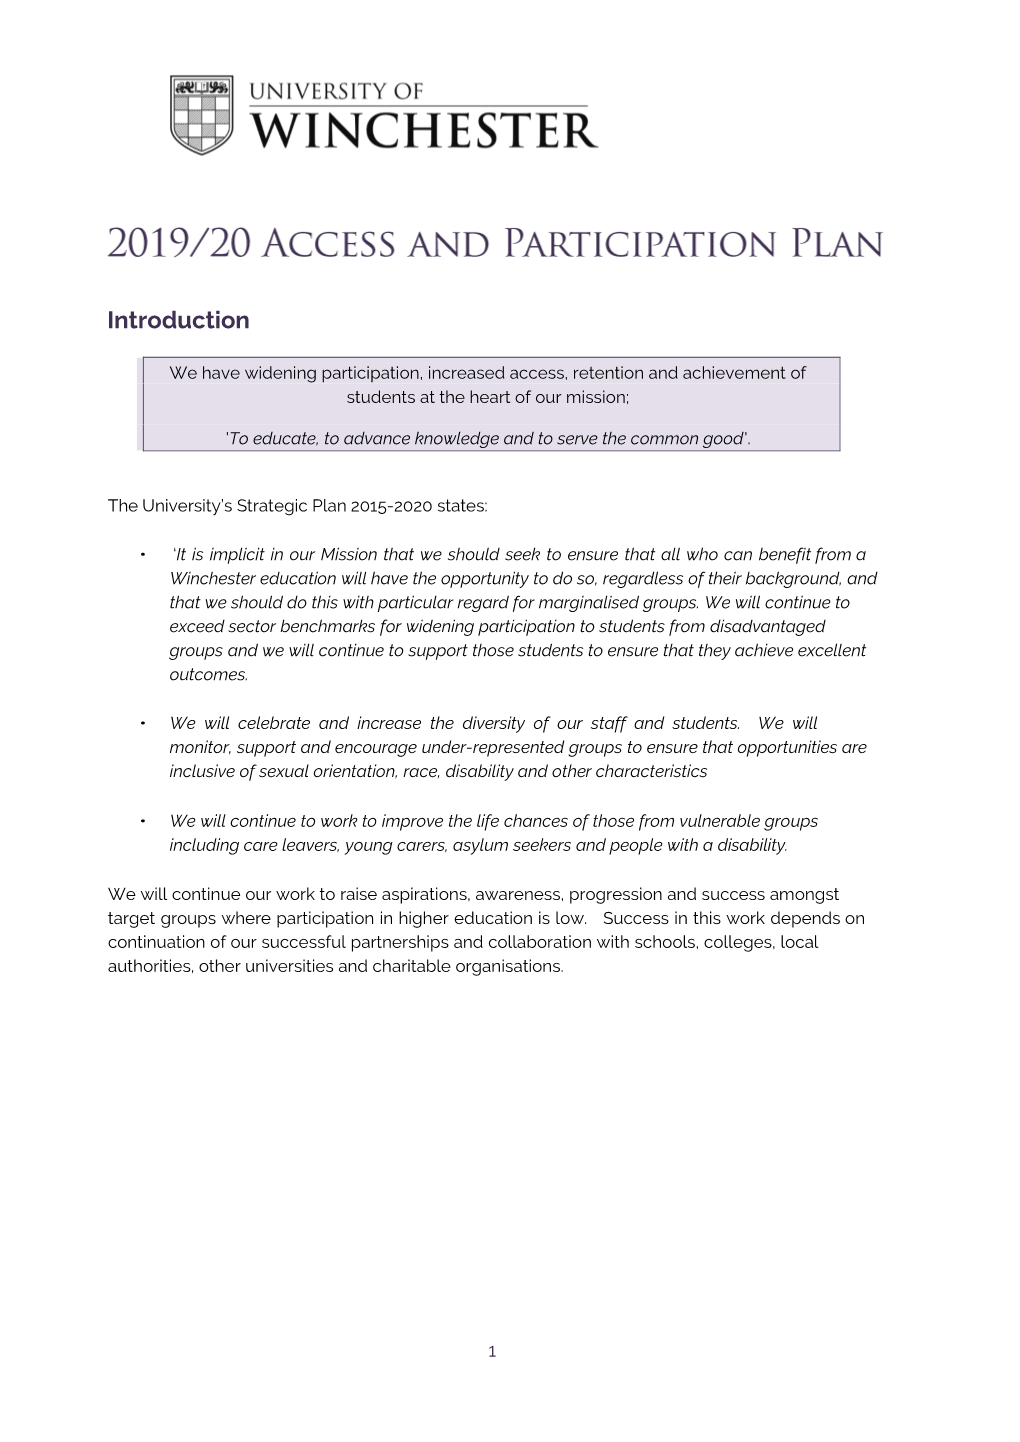 University of Winchester 2019-20 Access and Participation Plan